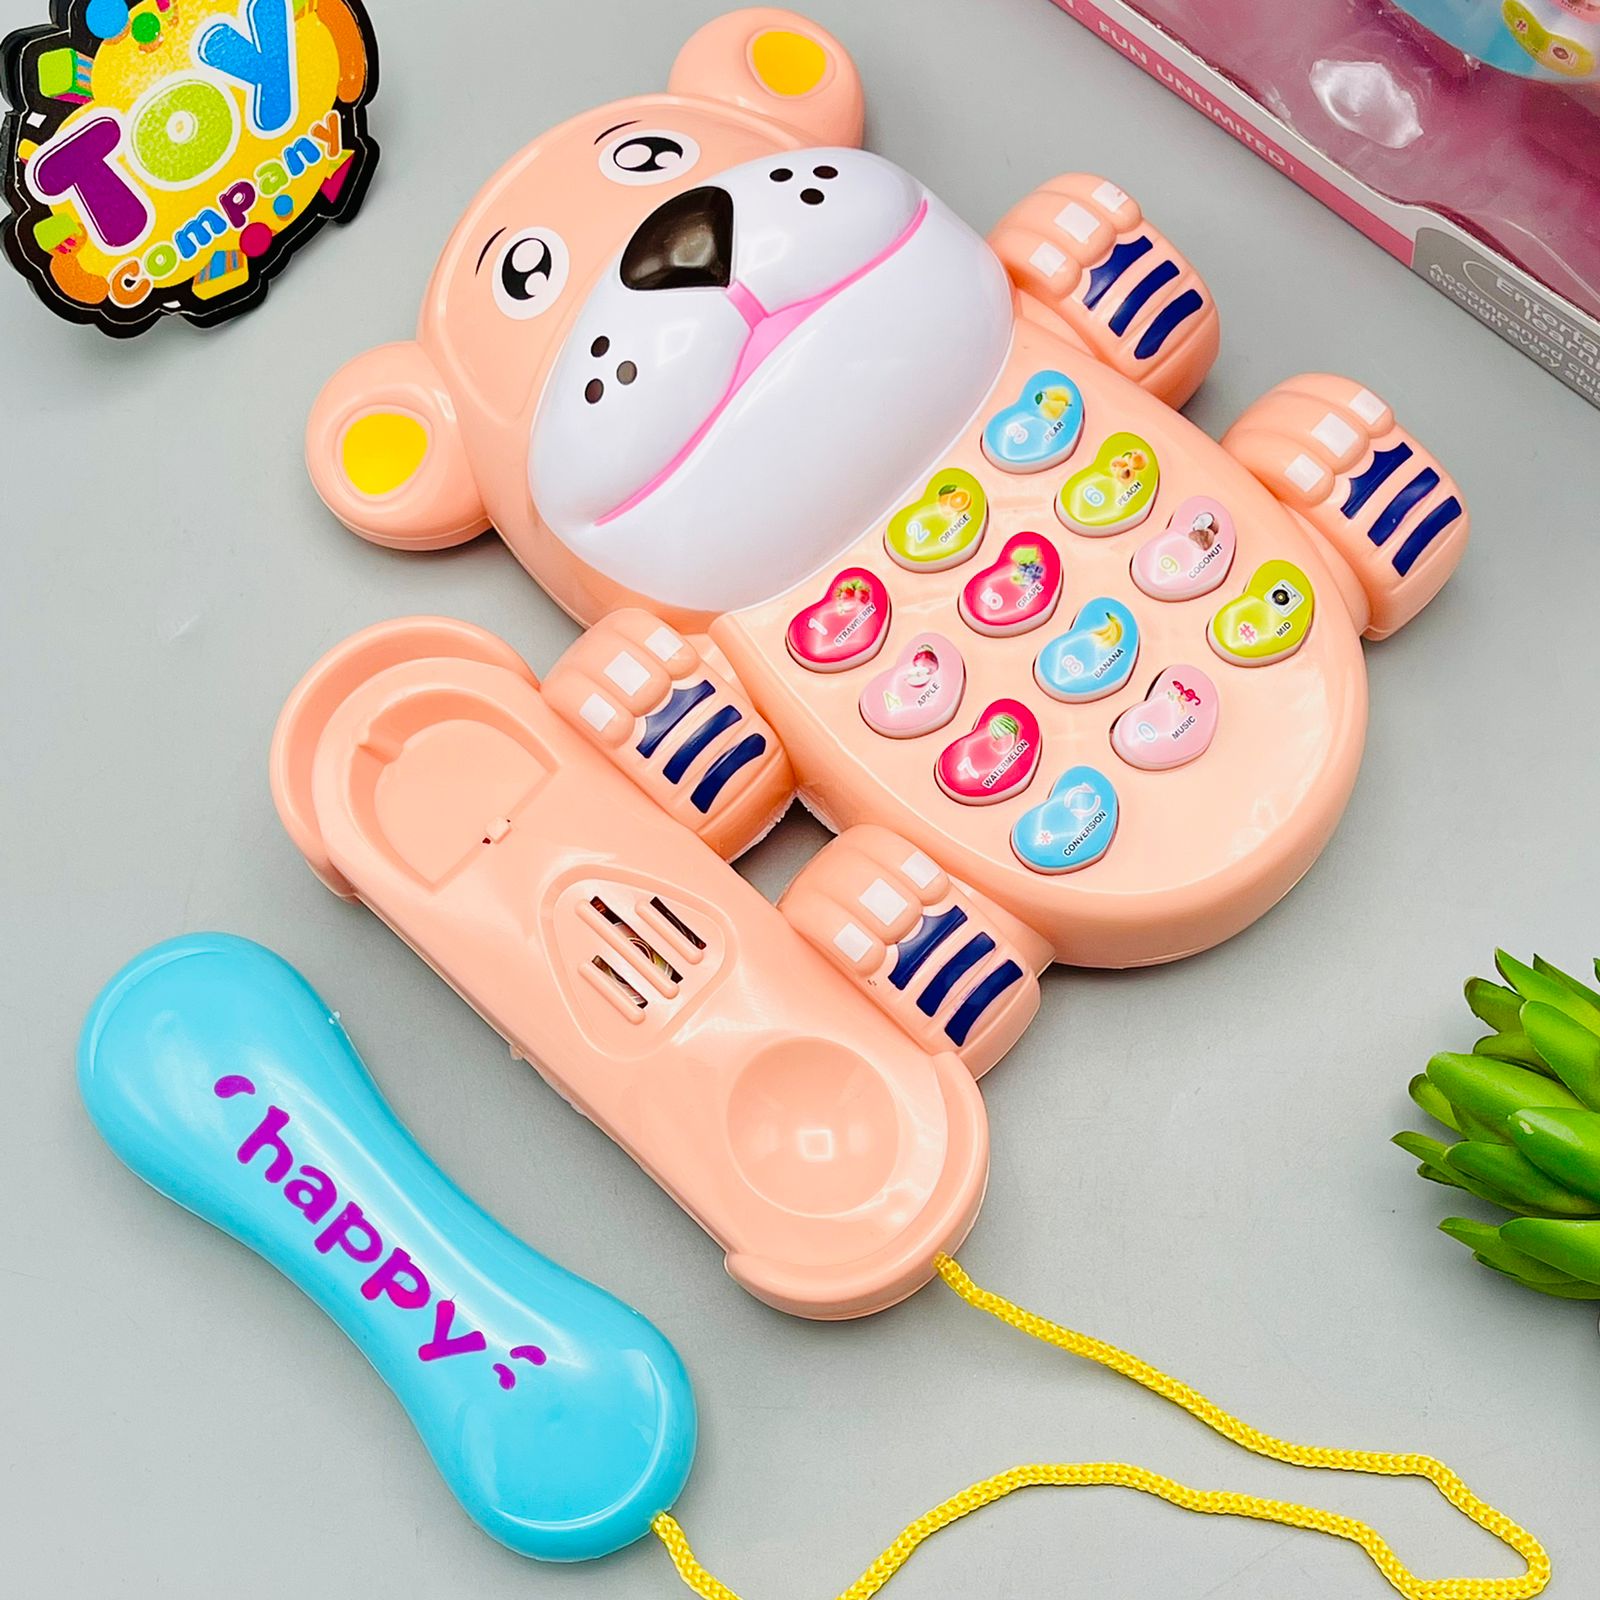 Cute Puppy-Shaped Musical Telephone Toy - pink